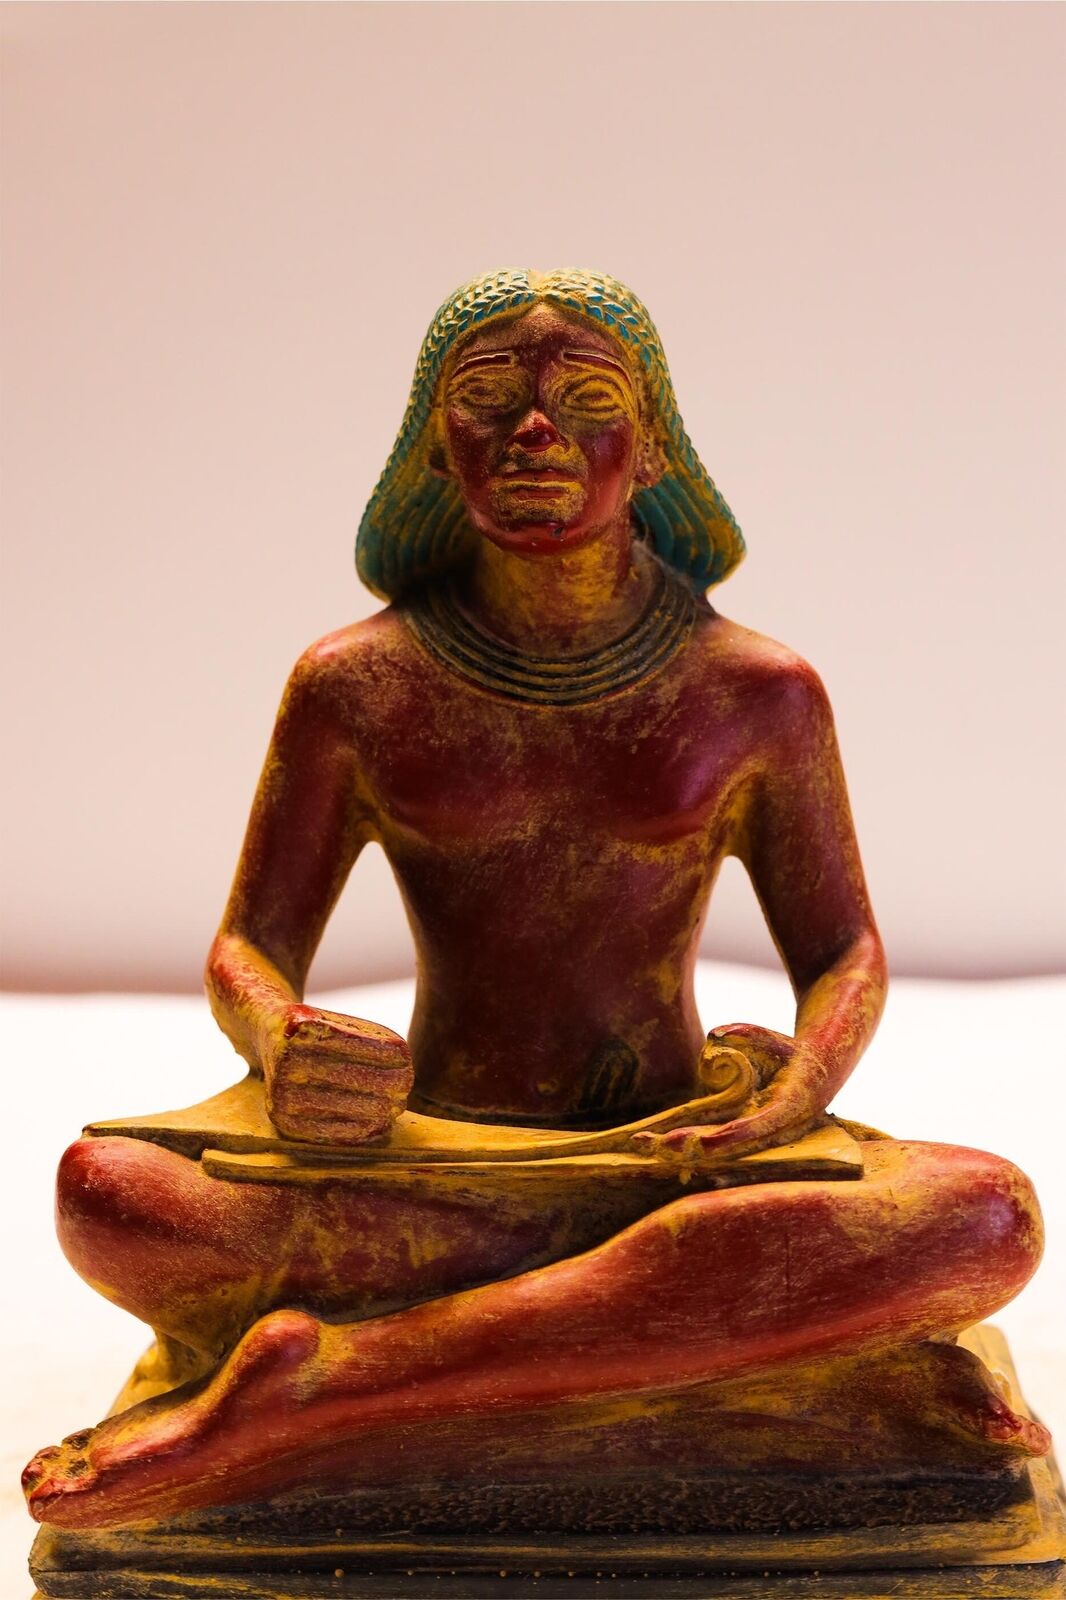 Marvelous Egyptian scribe statue, read and write figurine statue